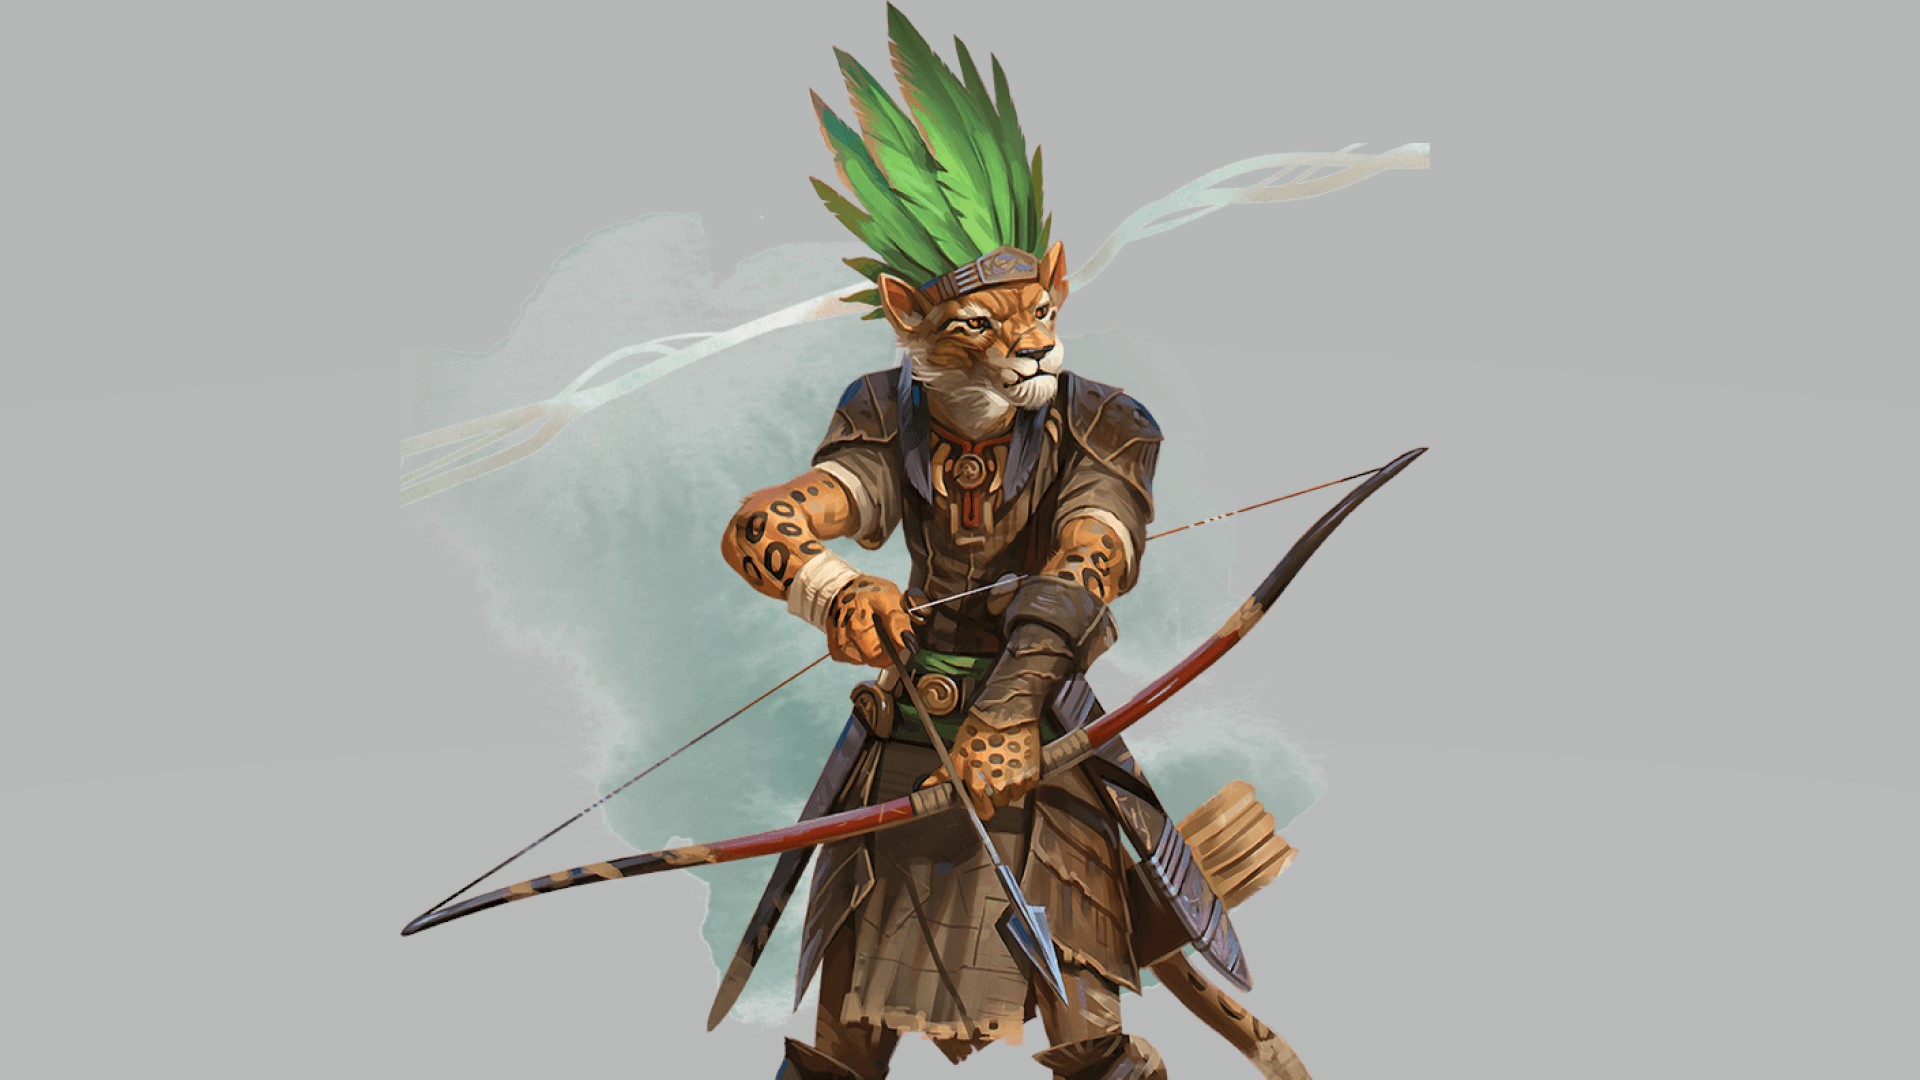 DnD Rogue 5e - Wizards of the Coast artwork showing a Tabaxi scout rogue with a bow